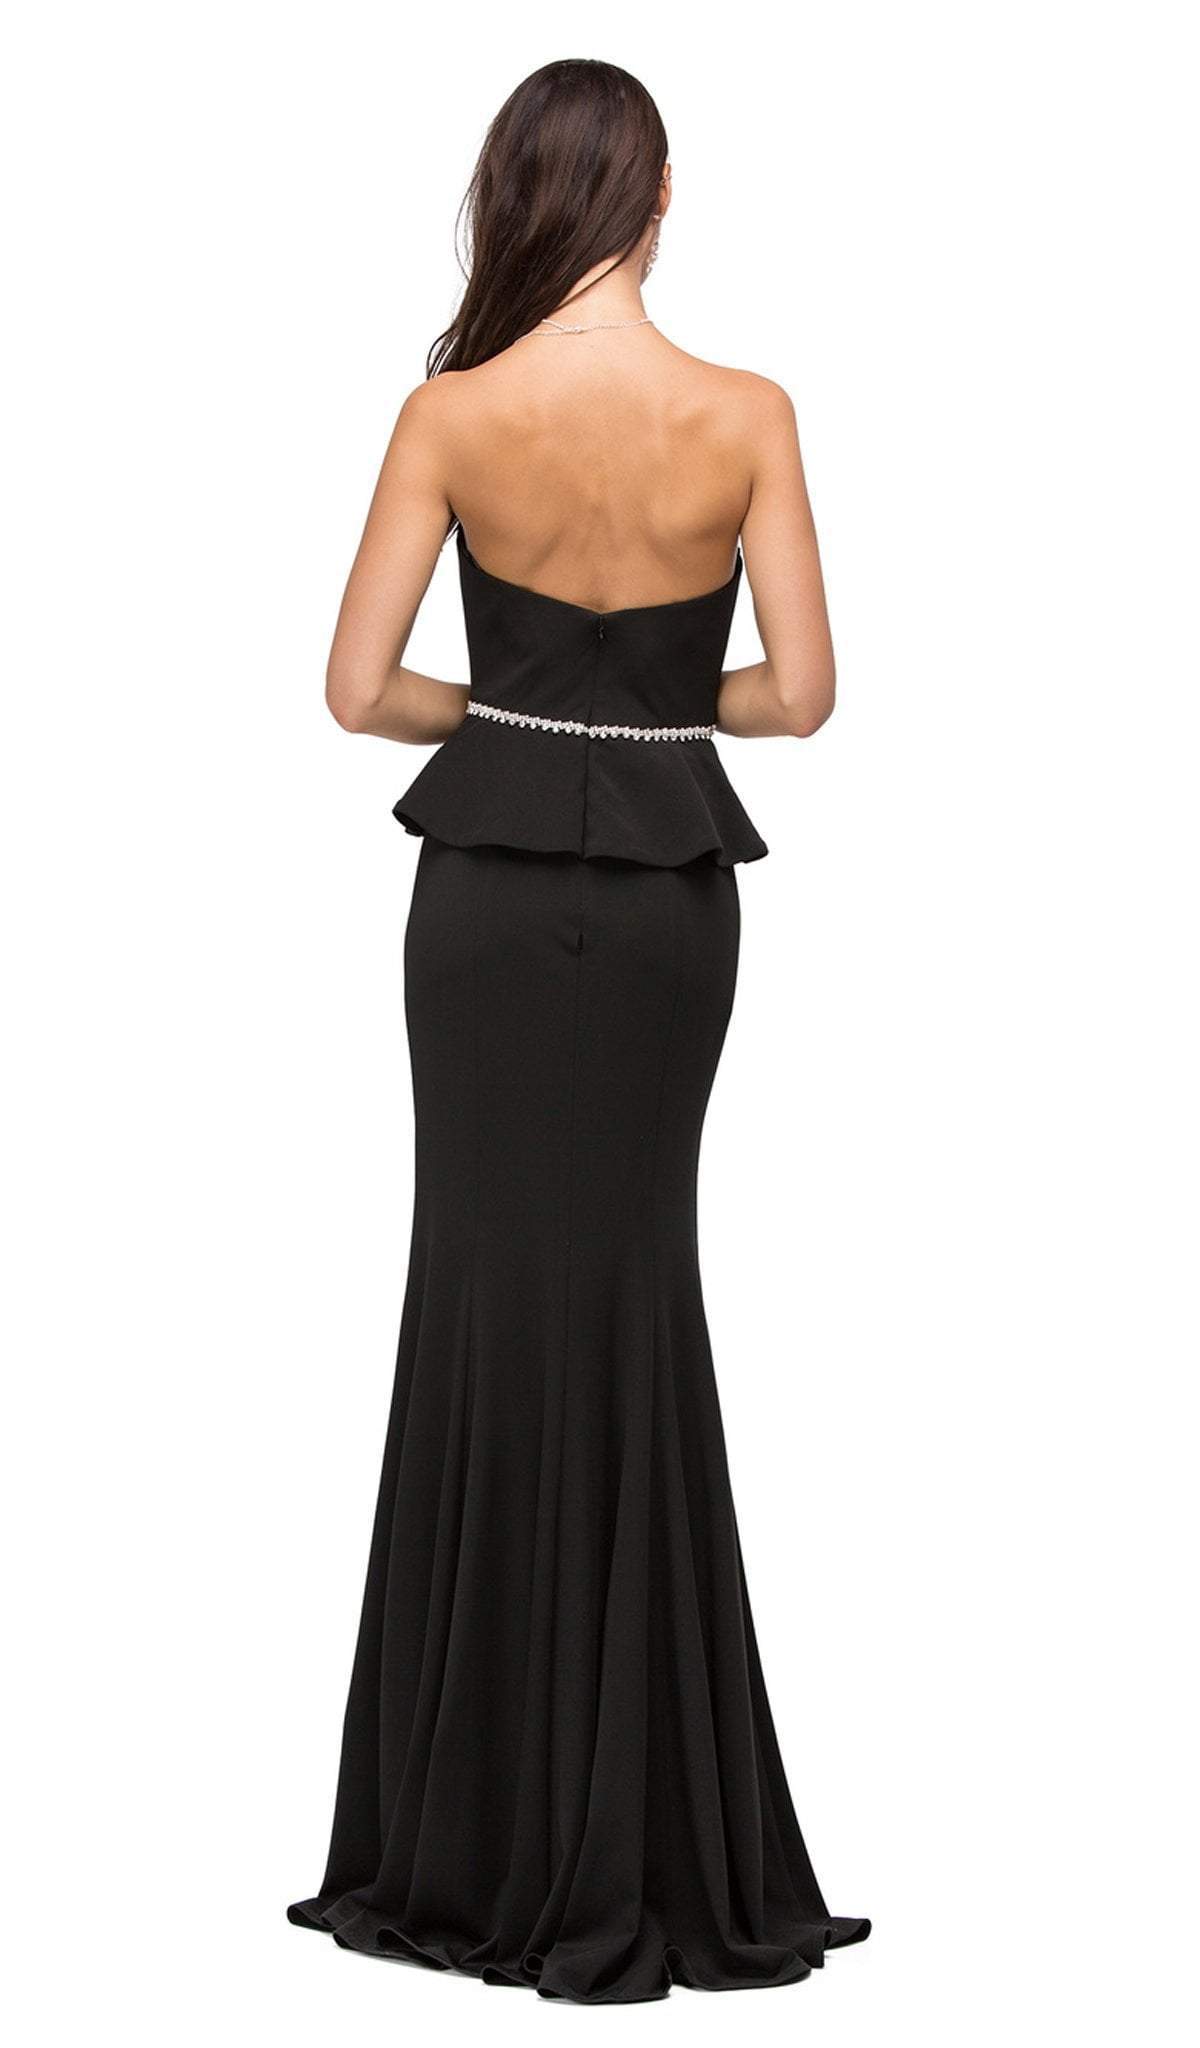 Dancing Queen - 9753 Removable Straps Embellished Peplum Evening Dress Special Occasion Dress M / Black